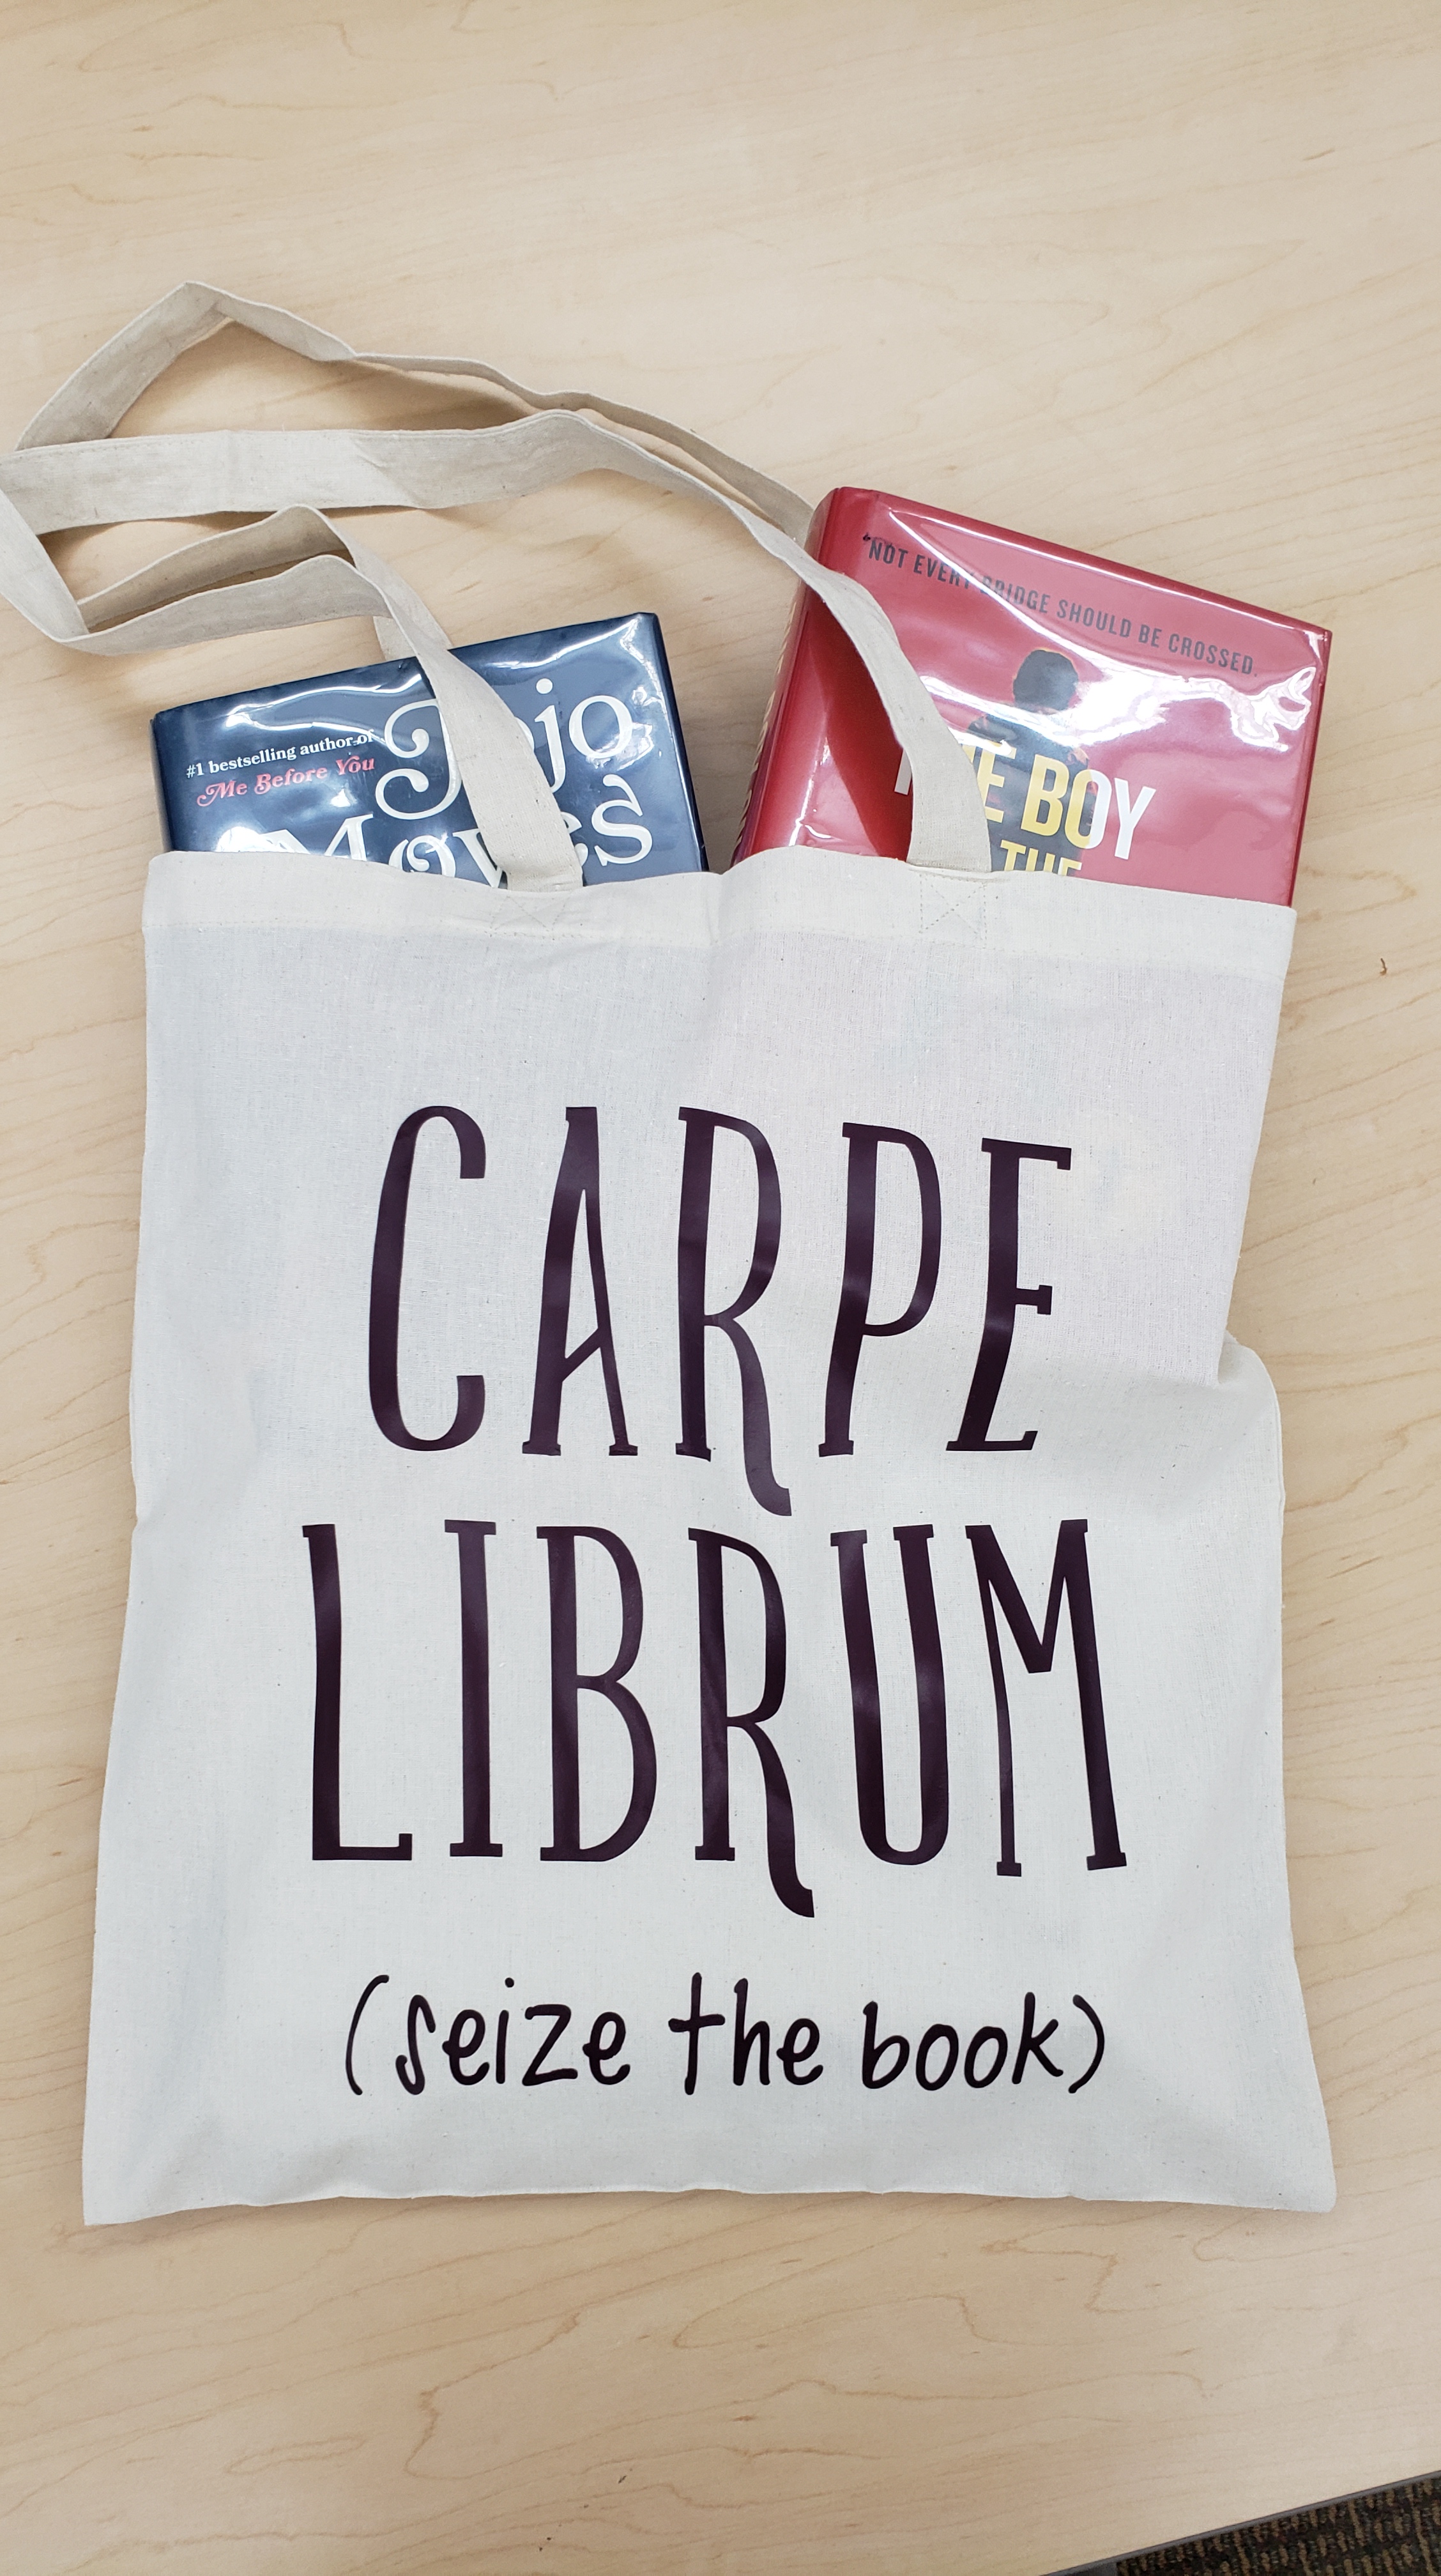 An off-white canvas bag that says Carpe Librum (seize the book) with two books